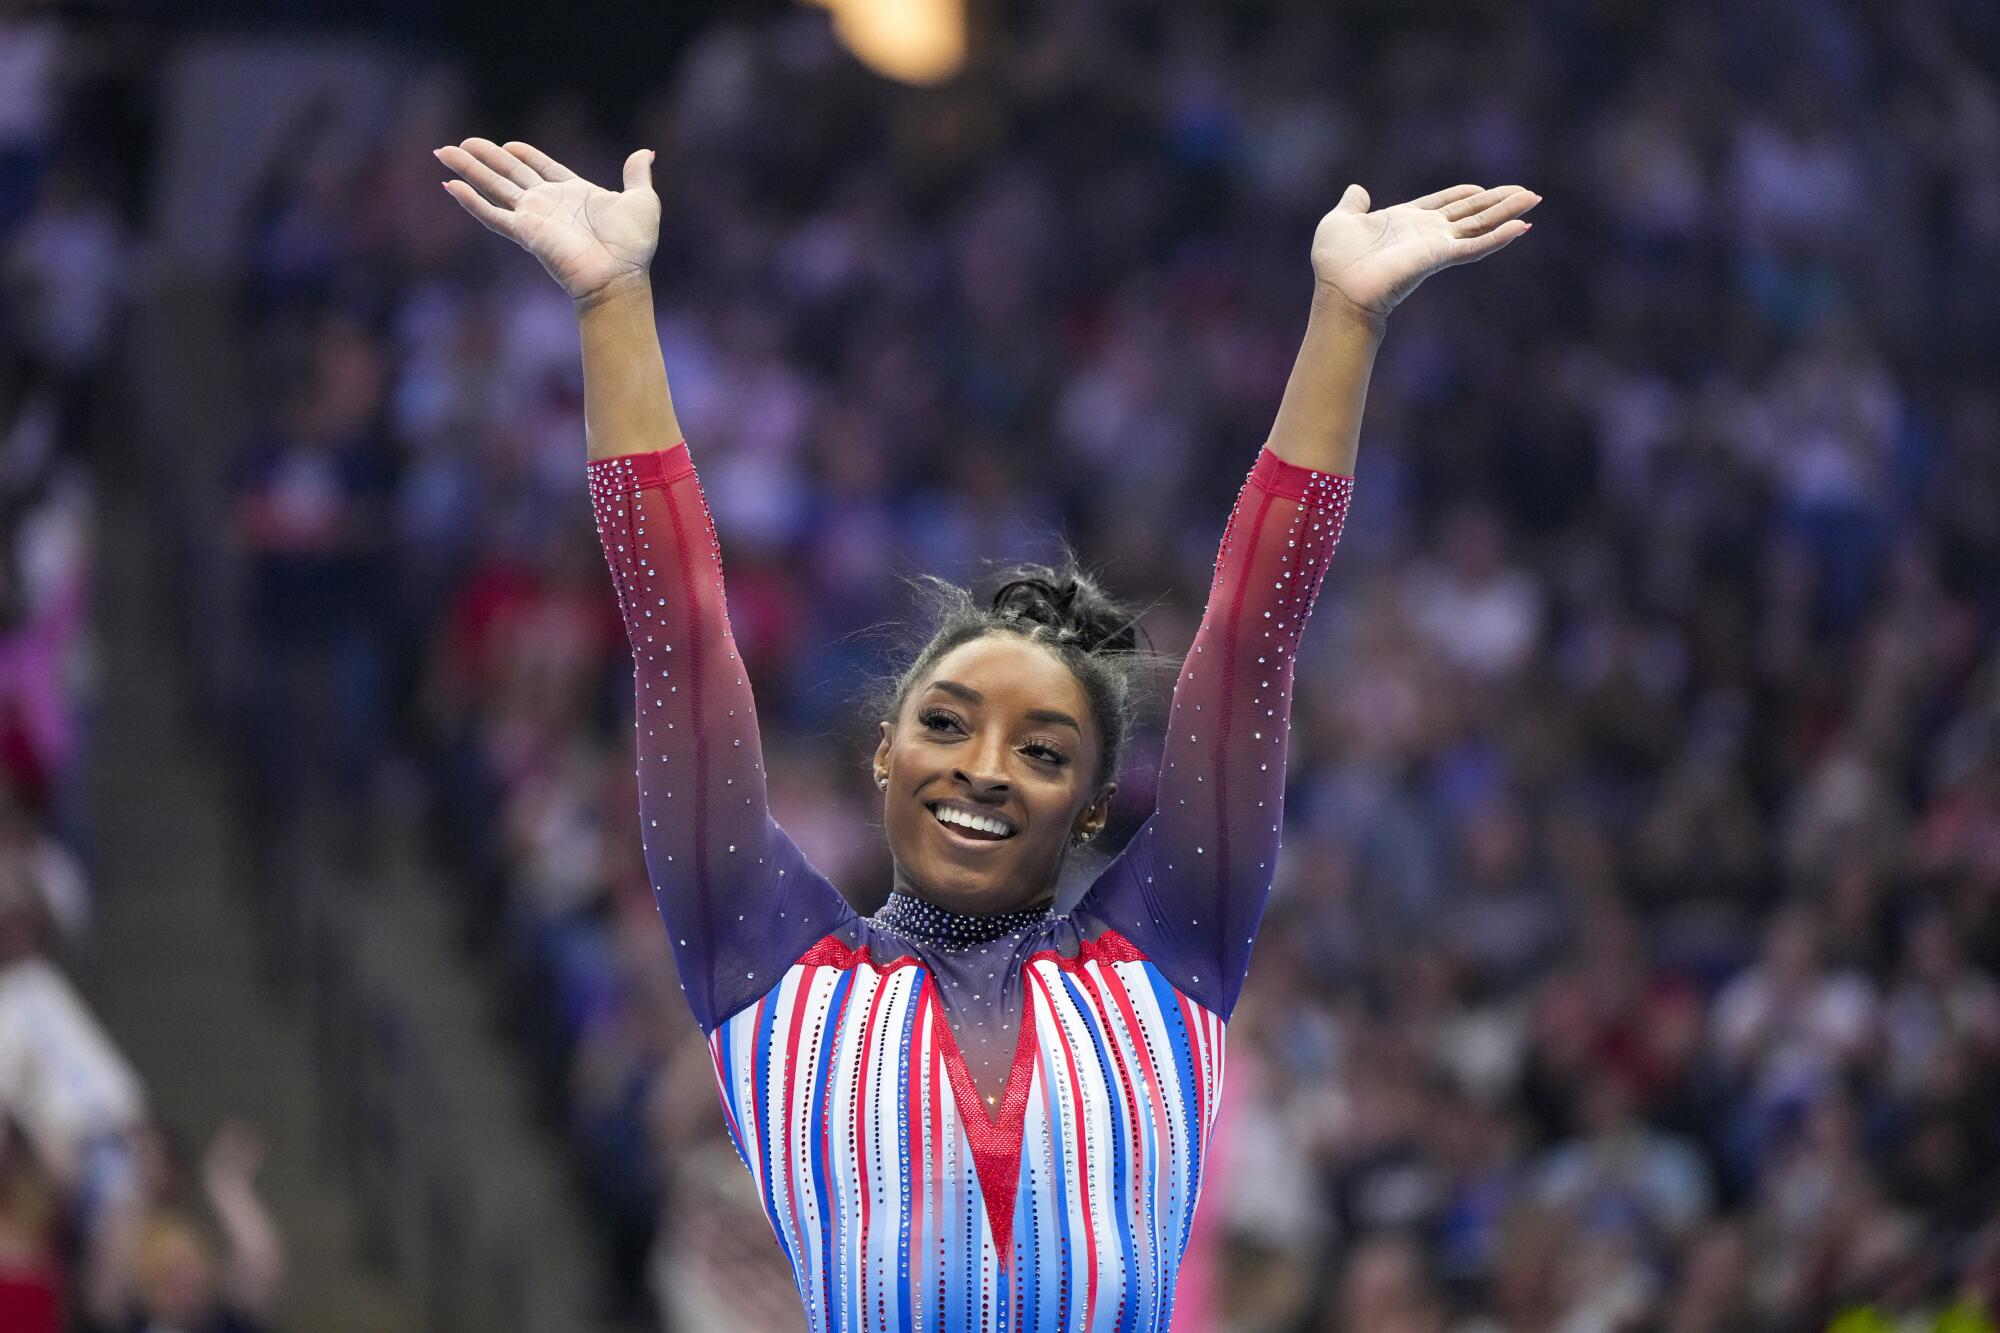 Simone Biles smiles after competing in the floor exercise Sunday.